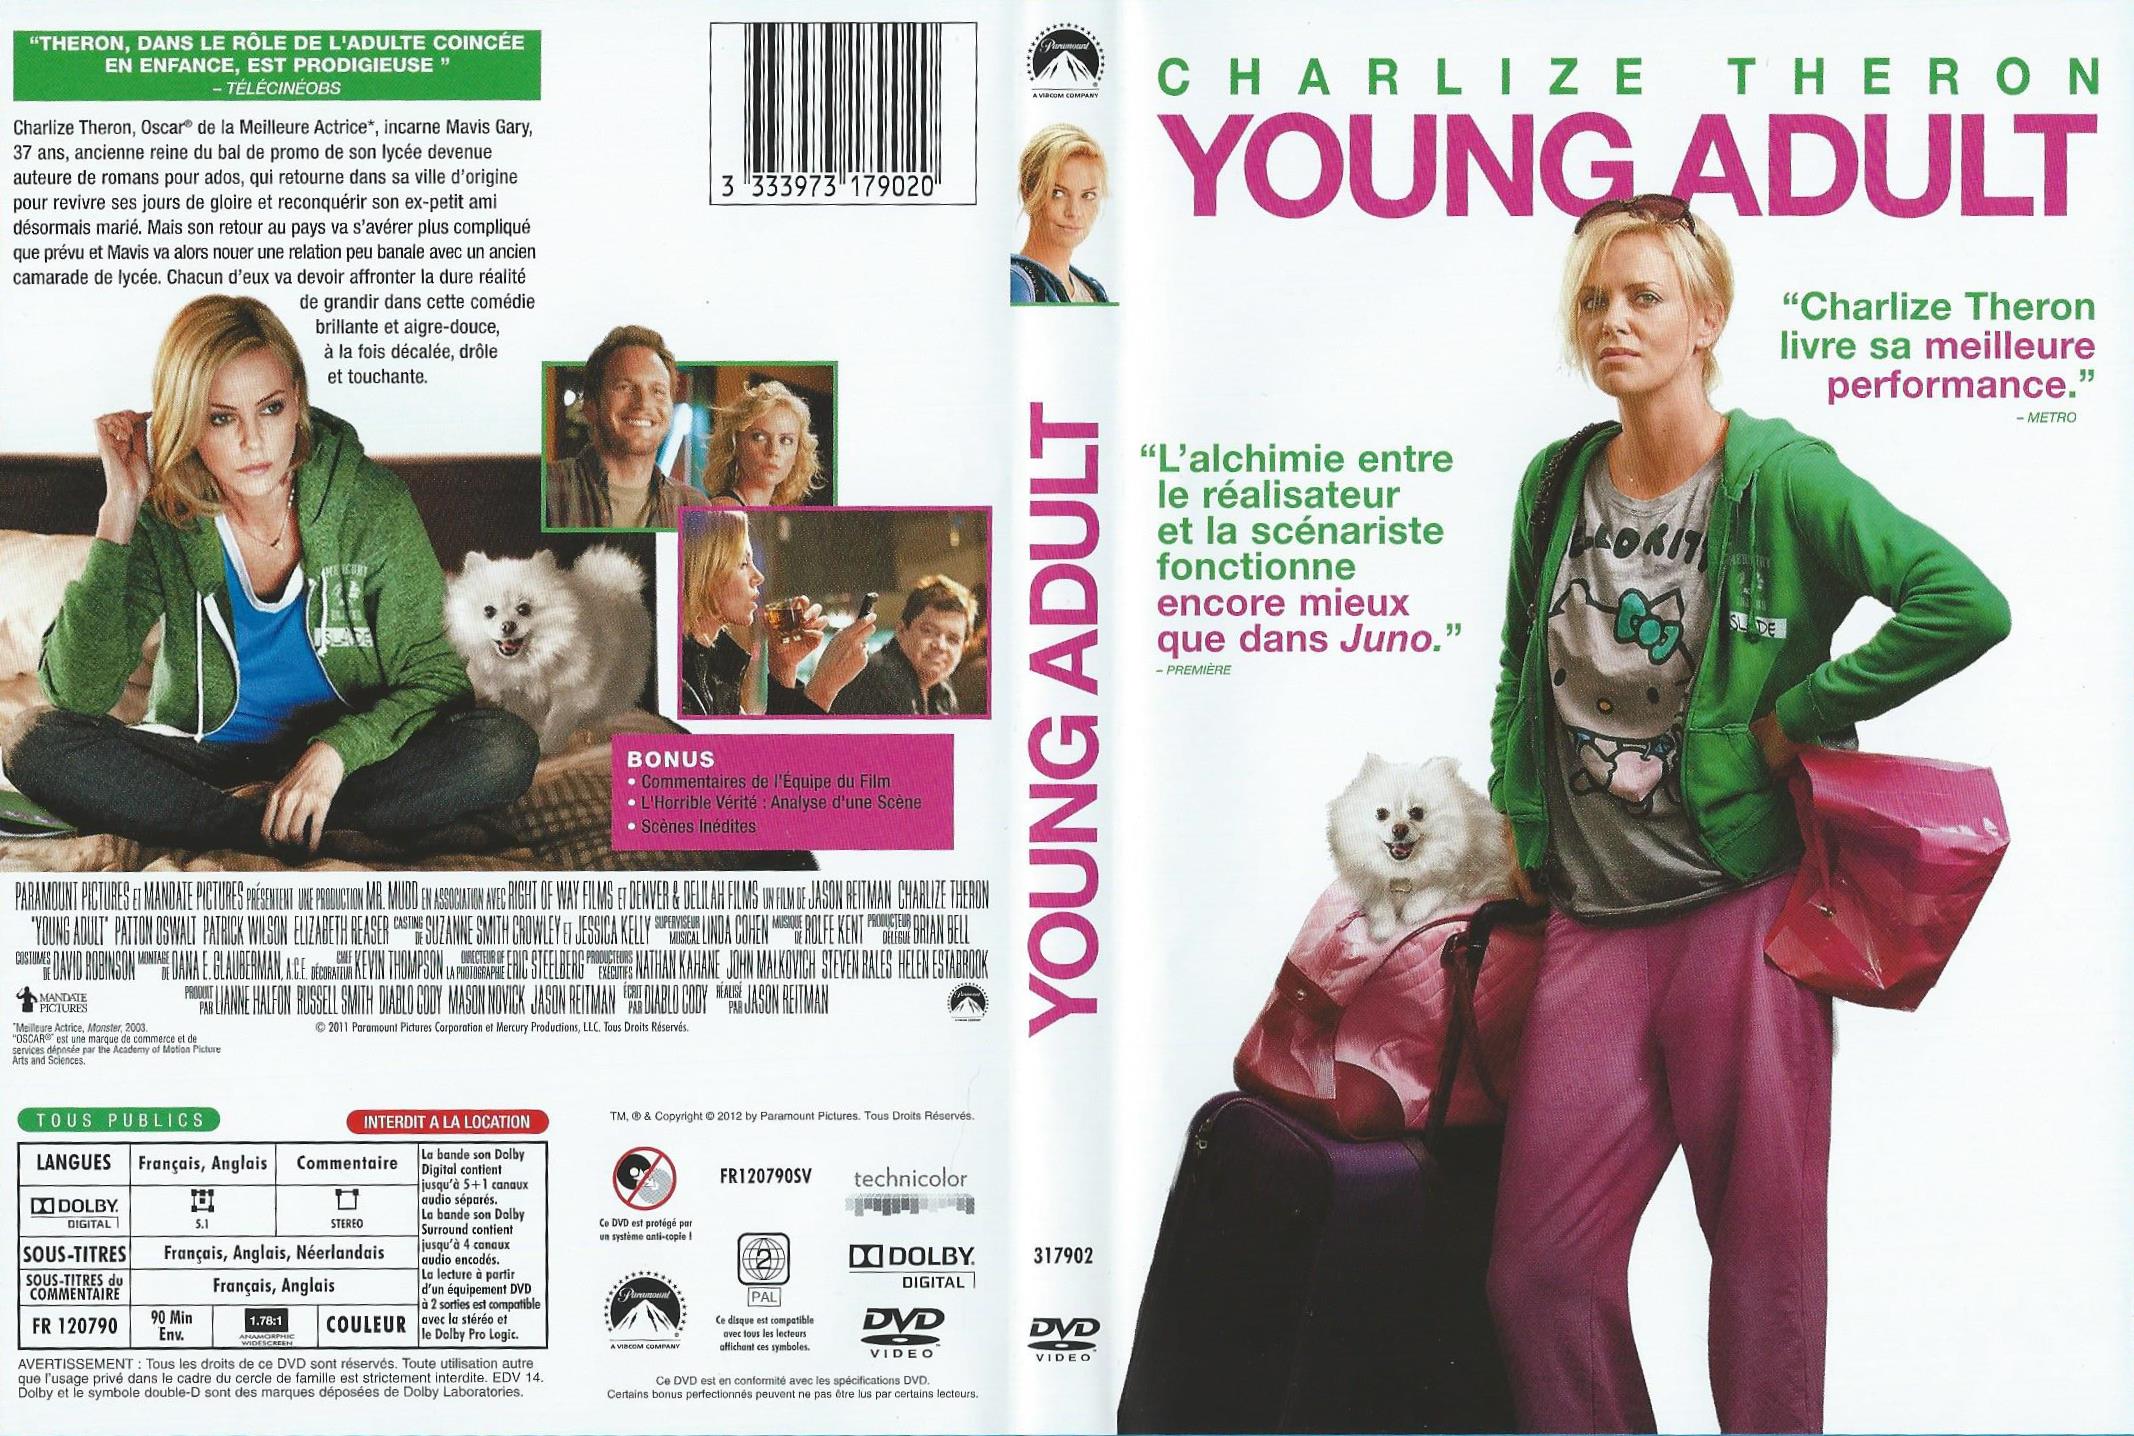 Jaquette DVD Young adult